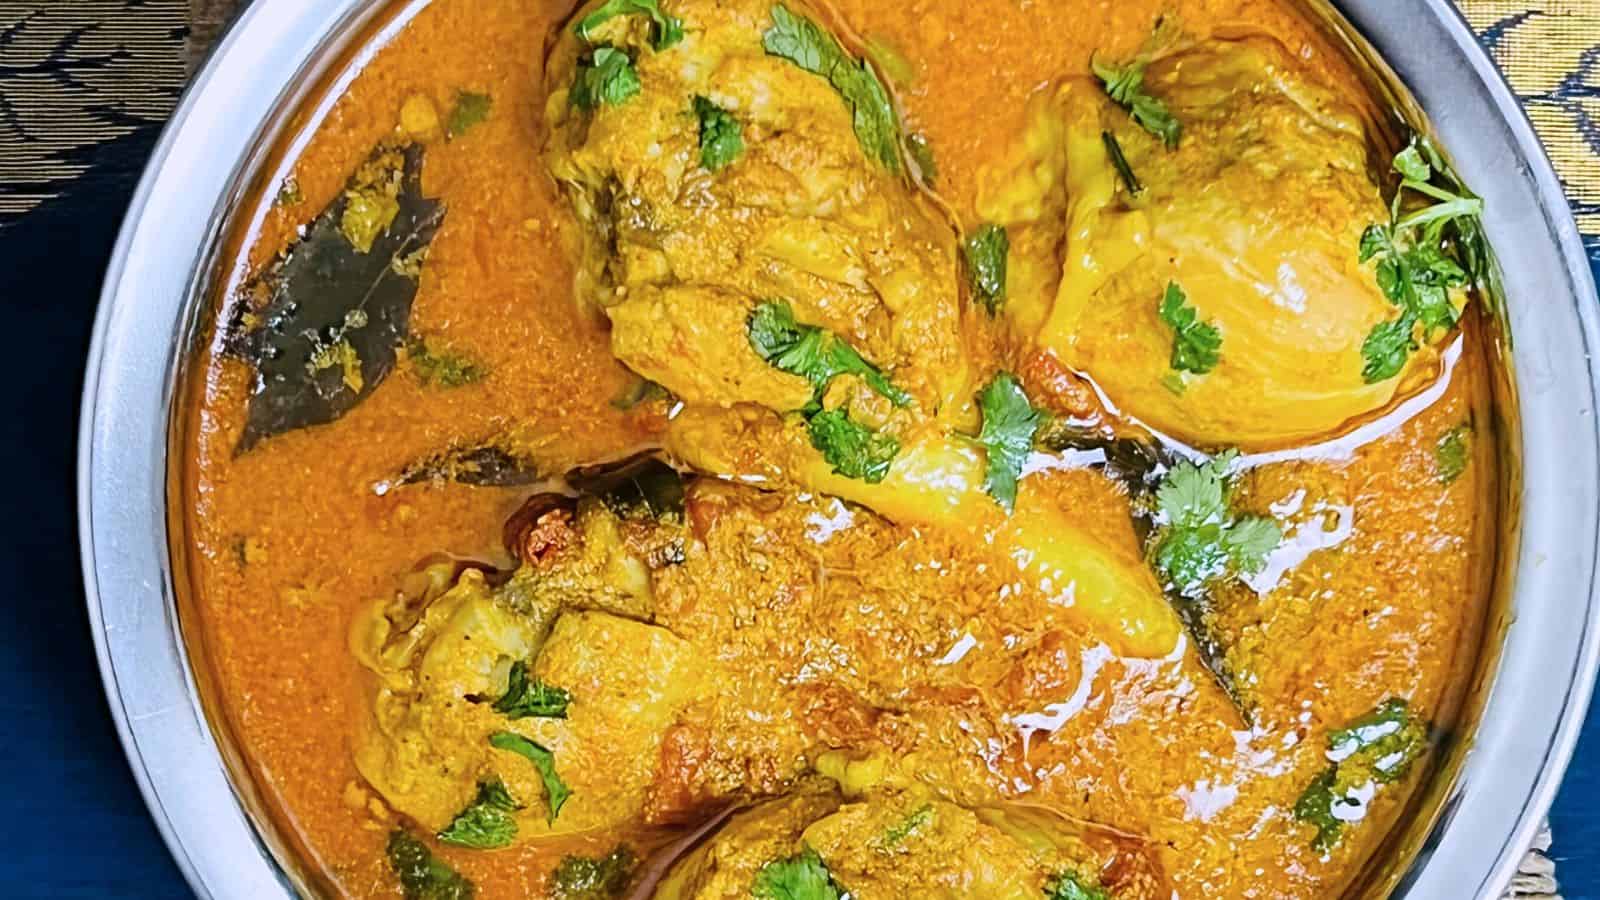 A bowl of Chettinad Chicken Curry garnished with fresh cilantro, displaying chunks of chicken and spices in a rich, creamy sauce.